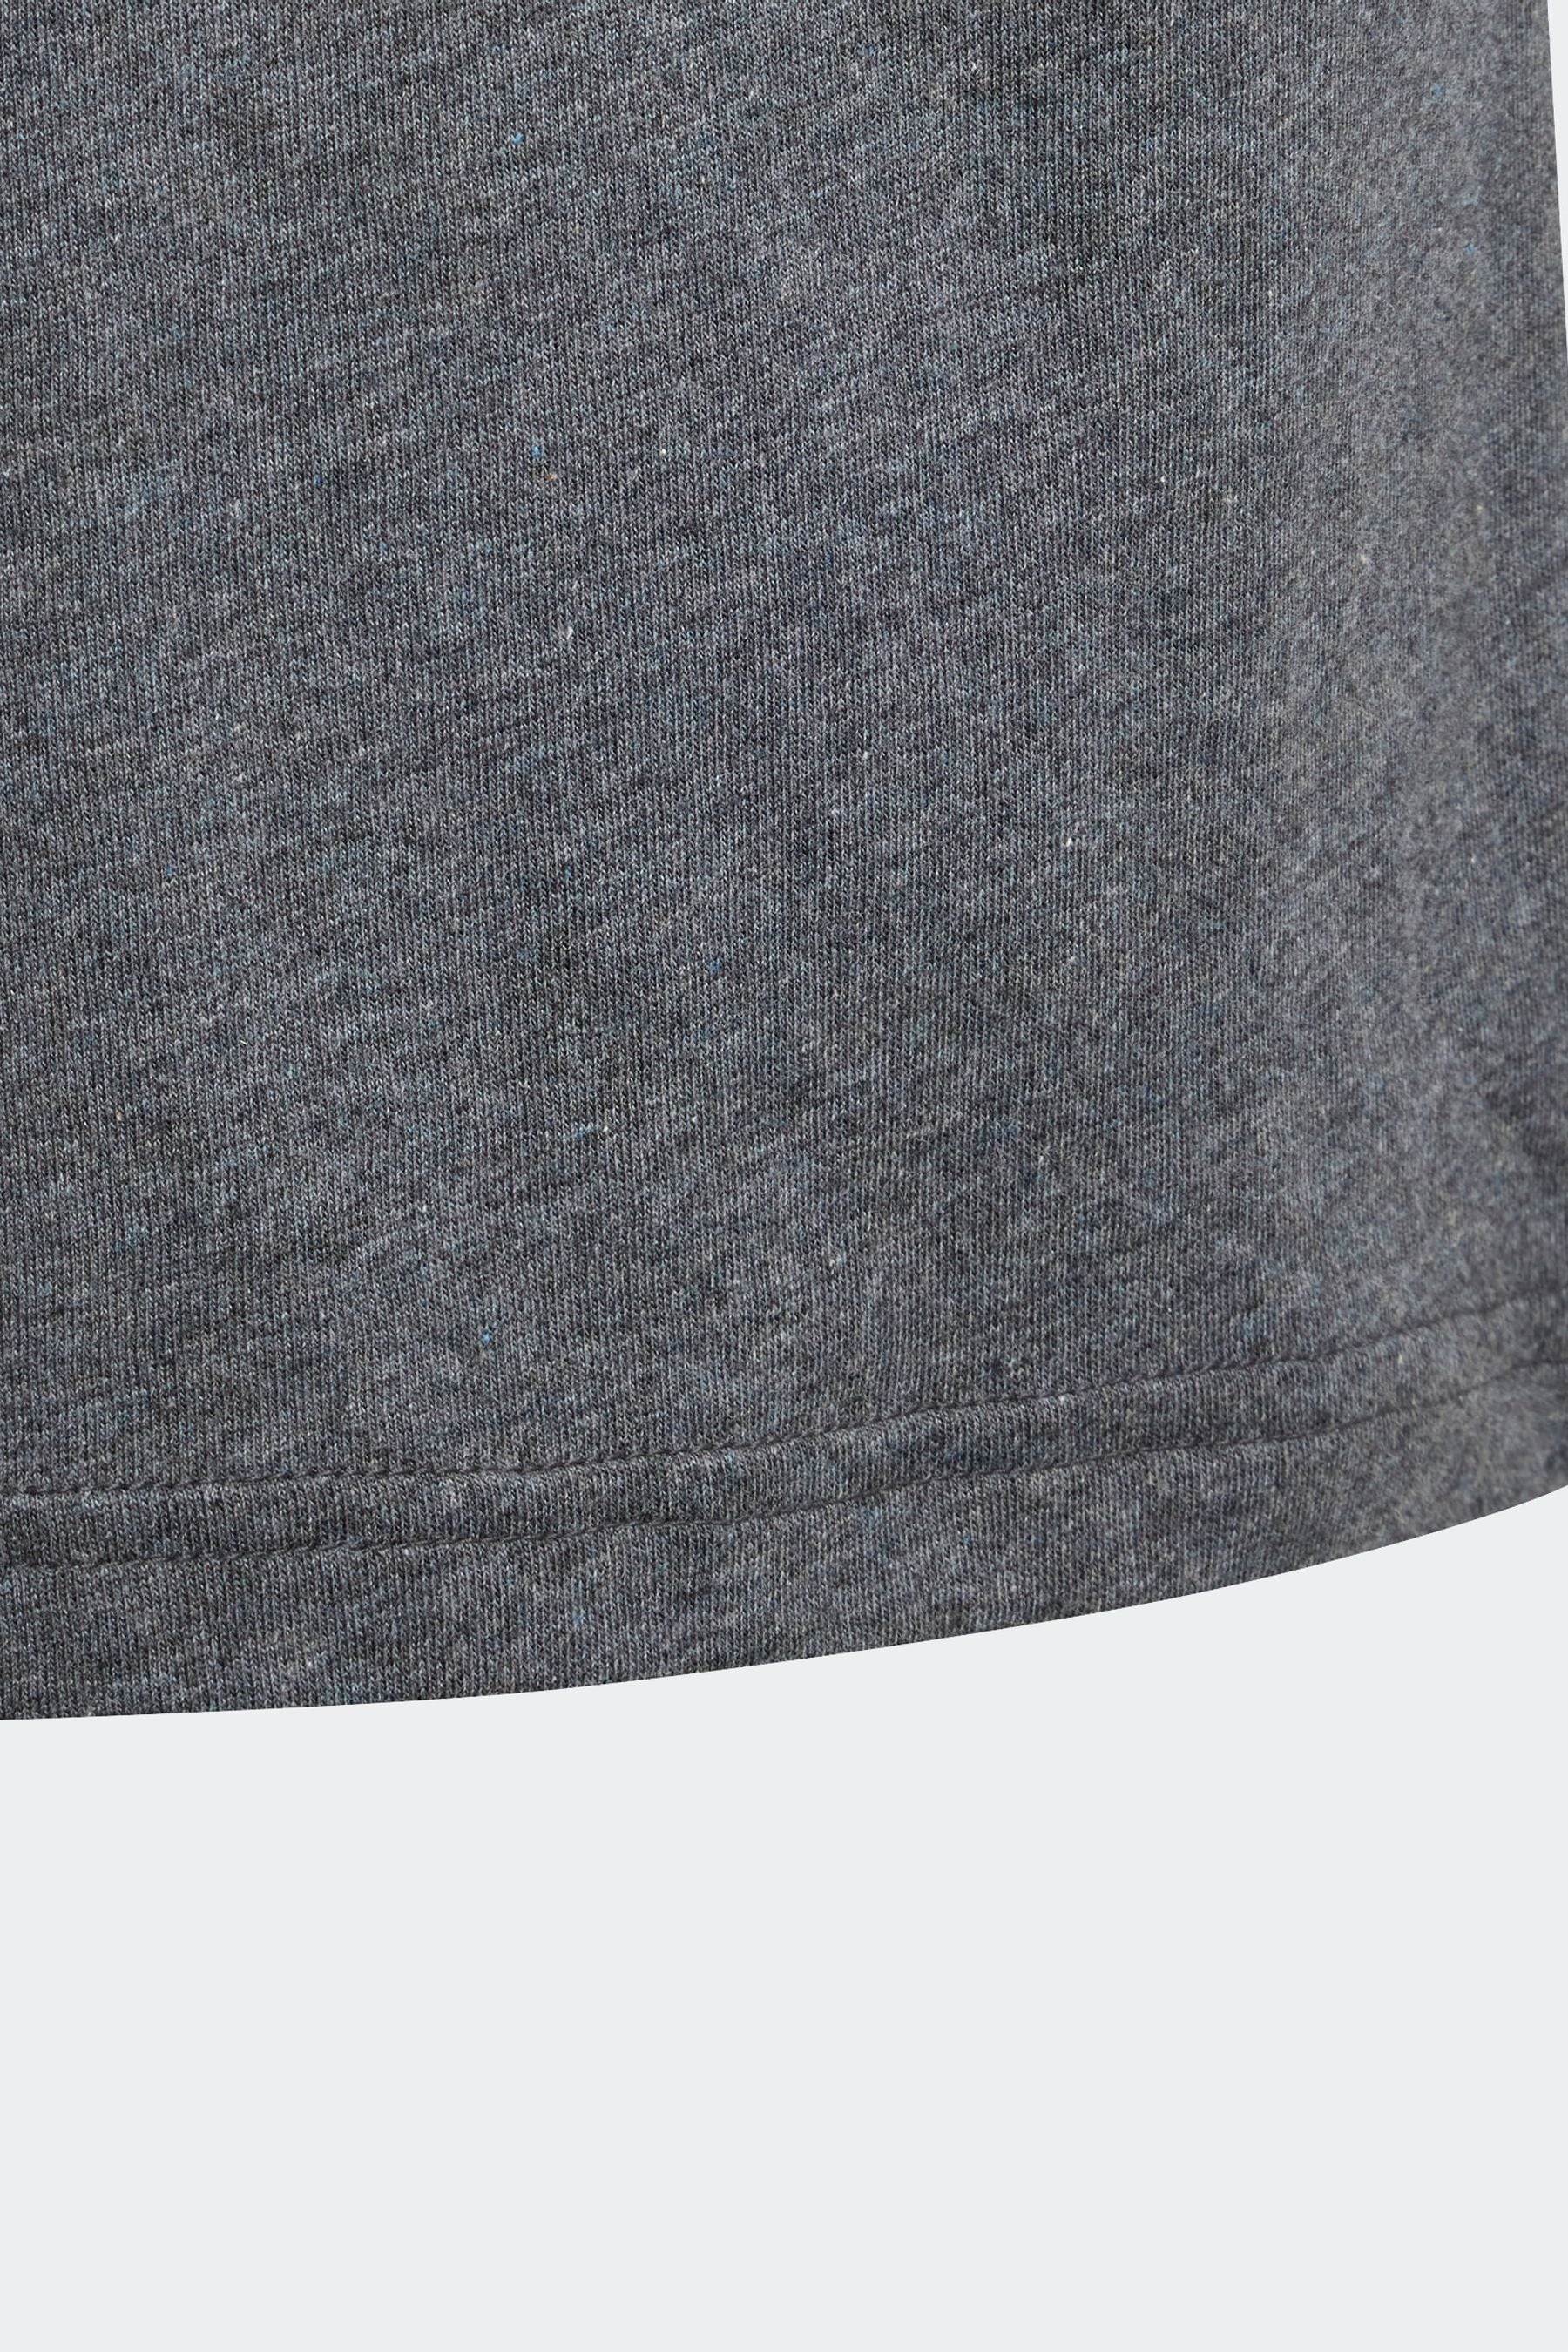 Buy adidas Grey T-Shirt from the Next UK online shop